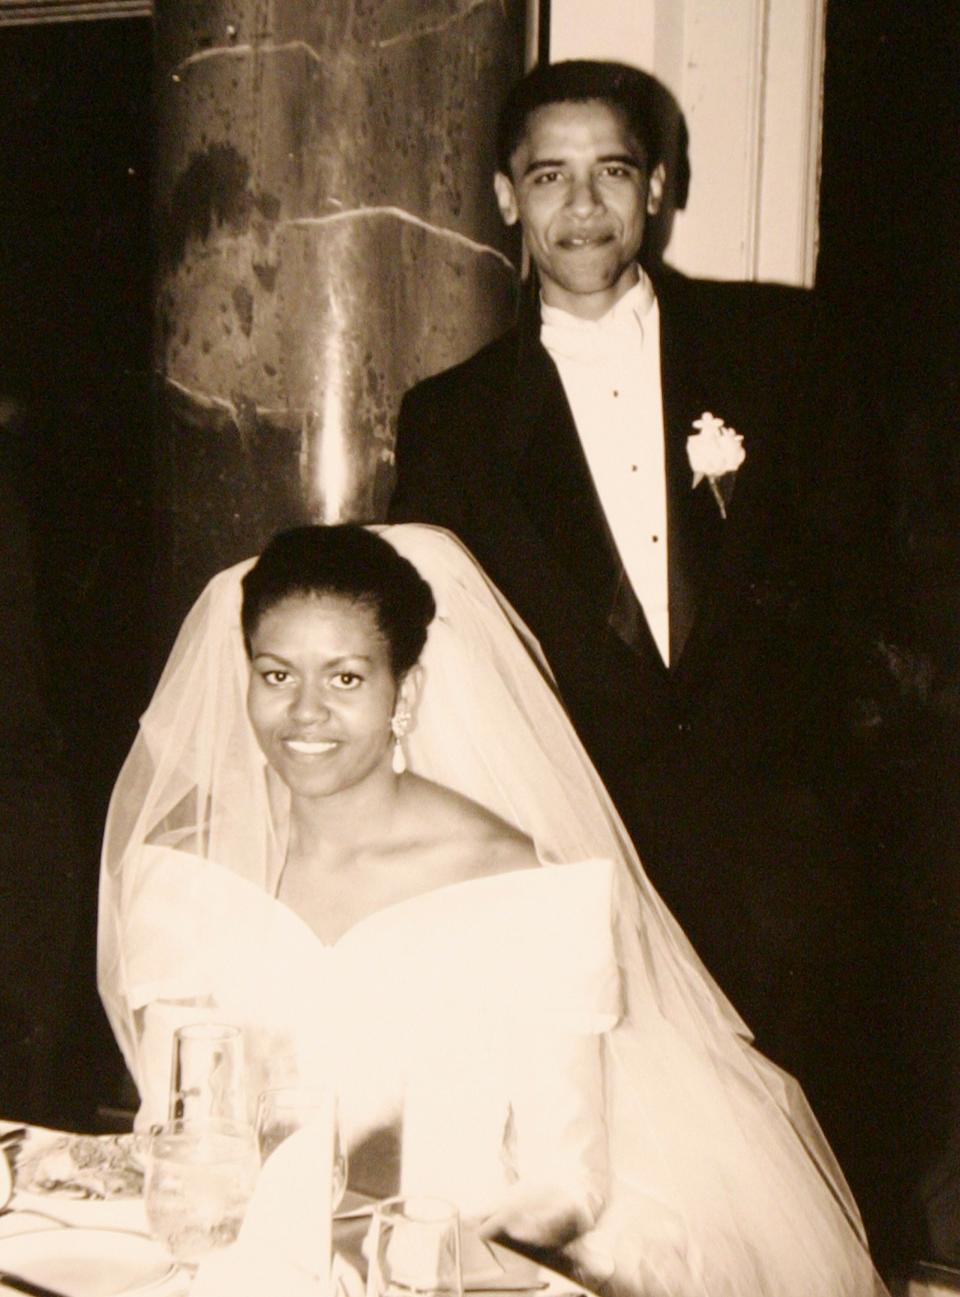 Michelle Obama wears a wedding dress, pictured with Barack on their wedding day